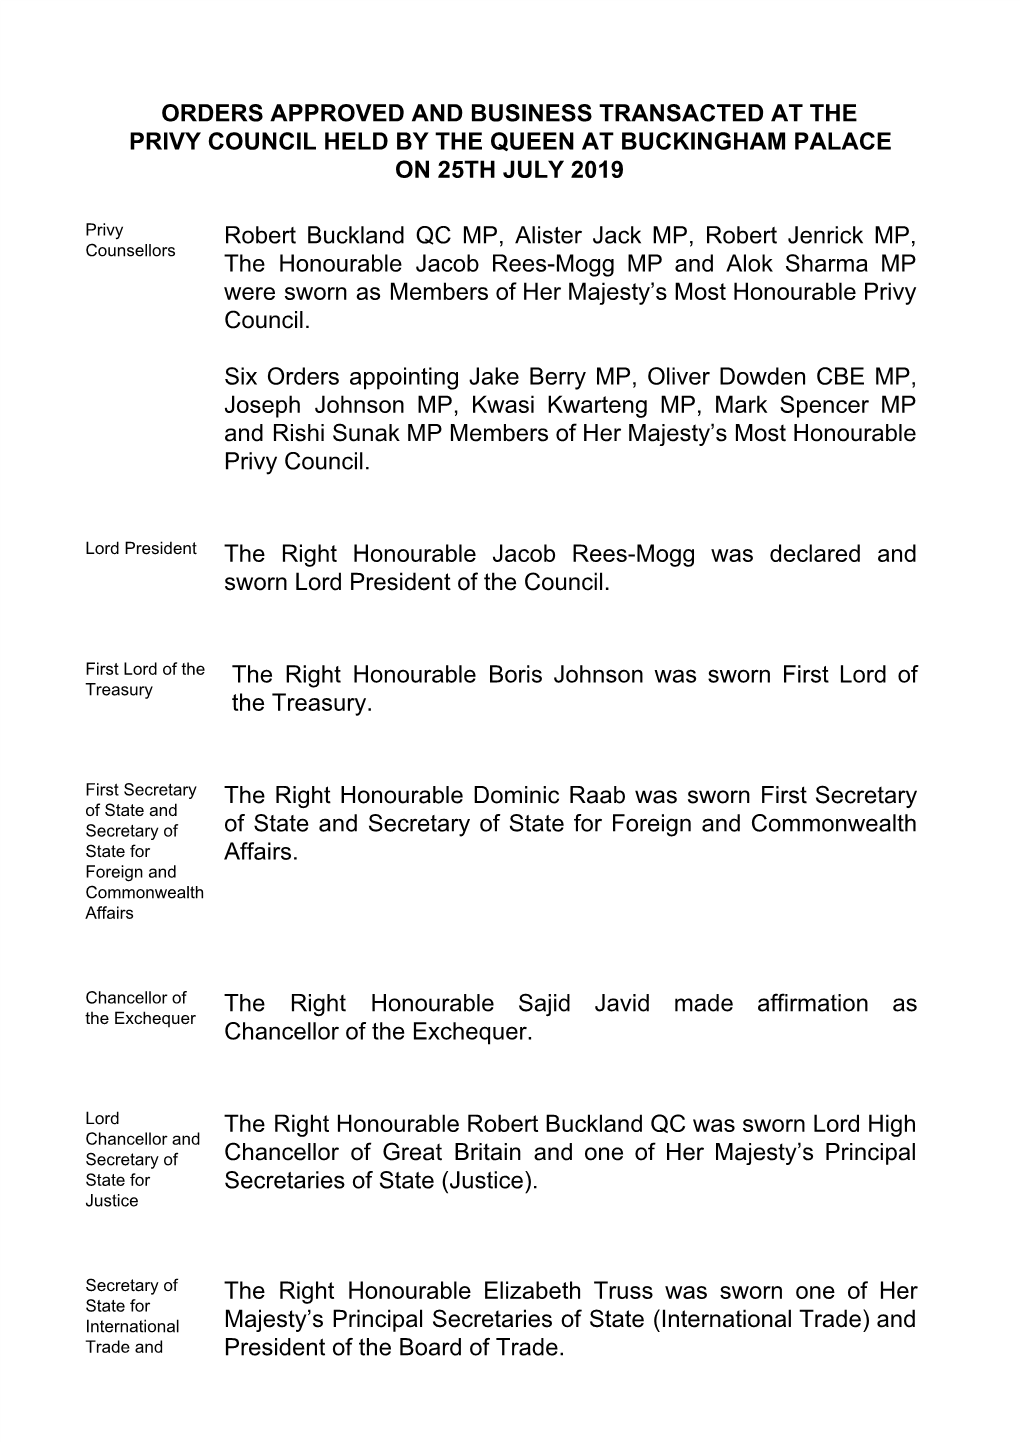 ORDERS APPROVED and BUSINESS TRANSACTED at the PRIVY COUNCIL HELD by the QUEEN at BUCKINGHAM PALACE on 25TH JULY 2019 Robert